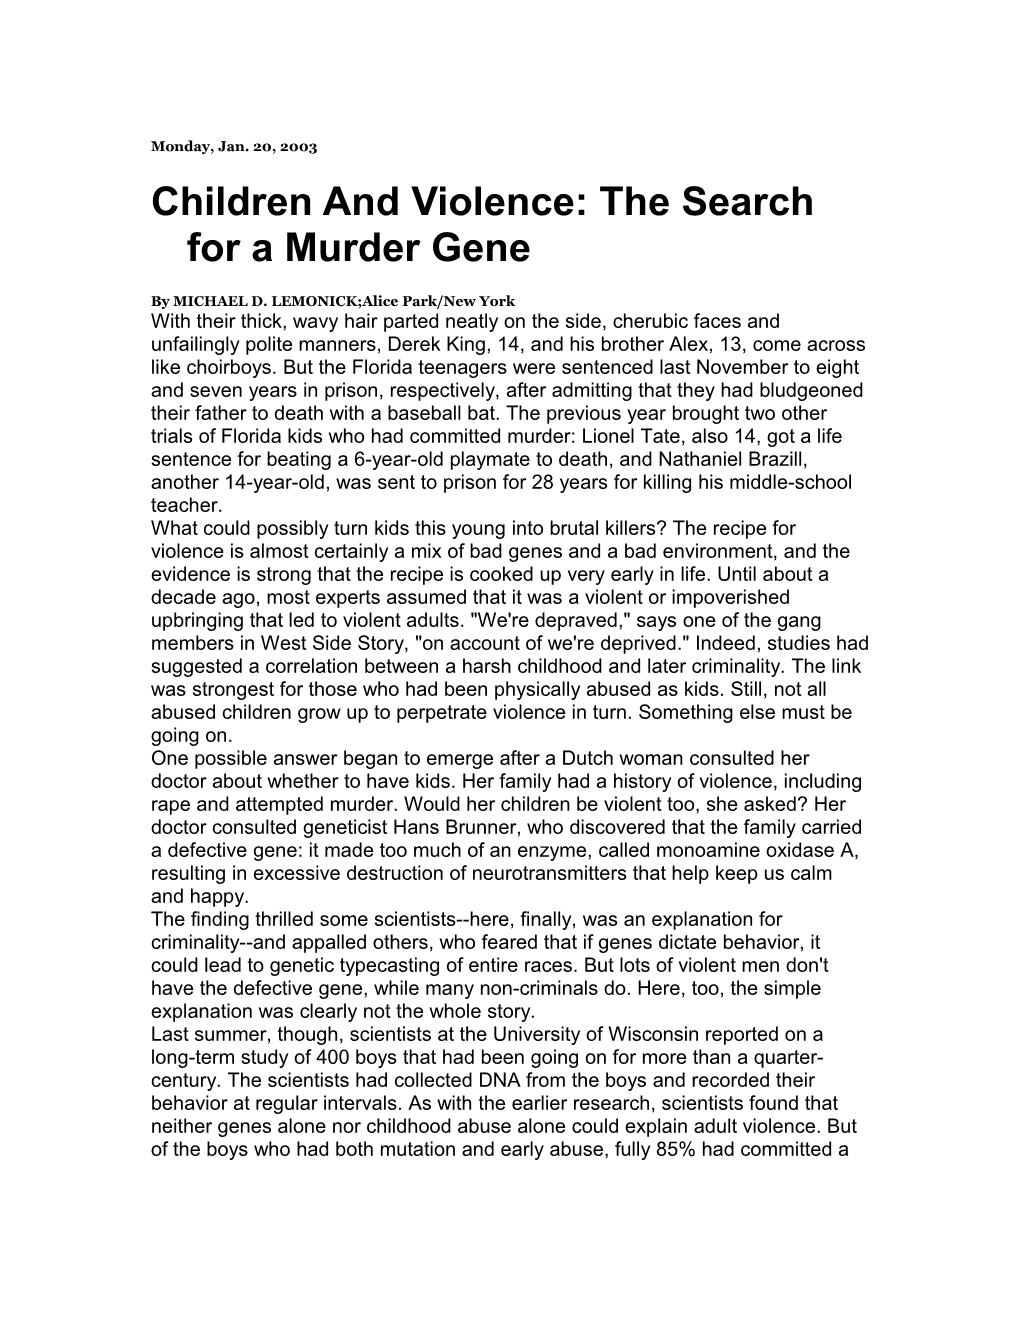 Children and Violence: the Search for a Murder Gene